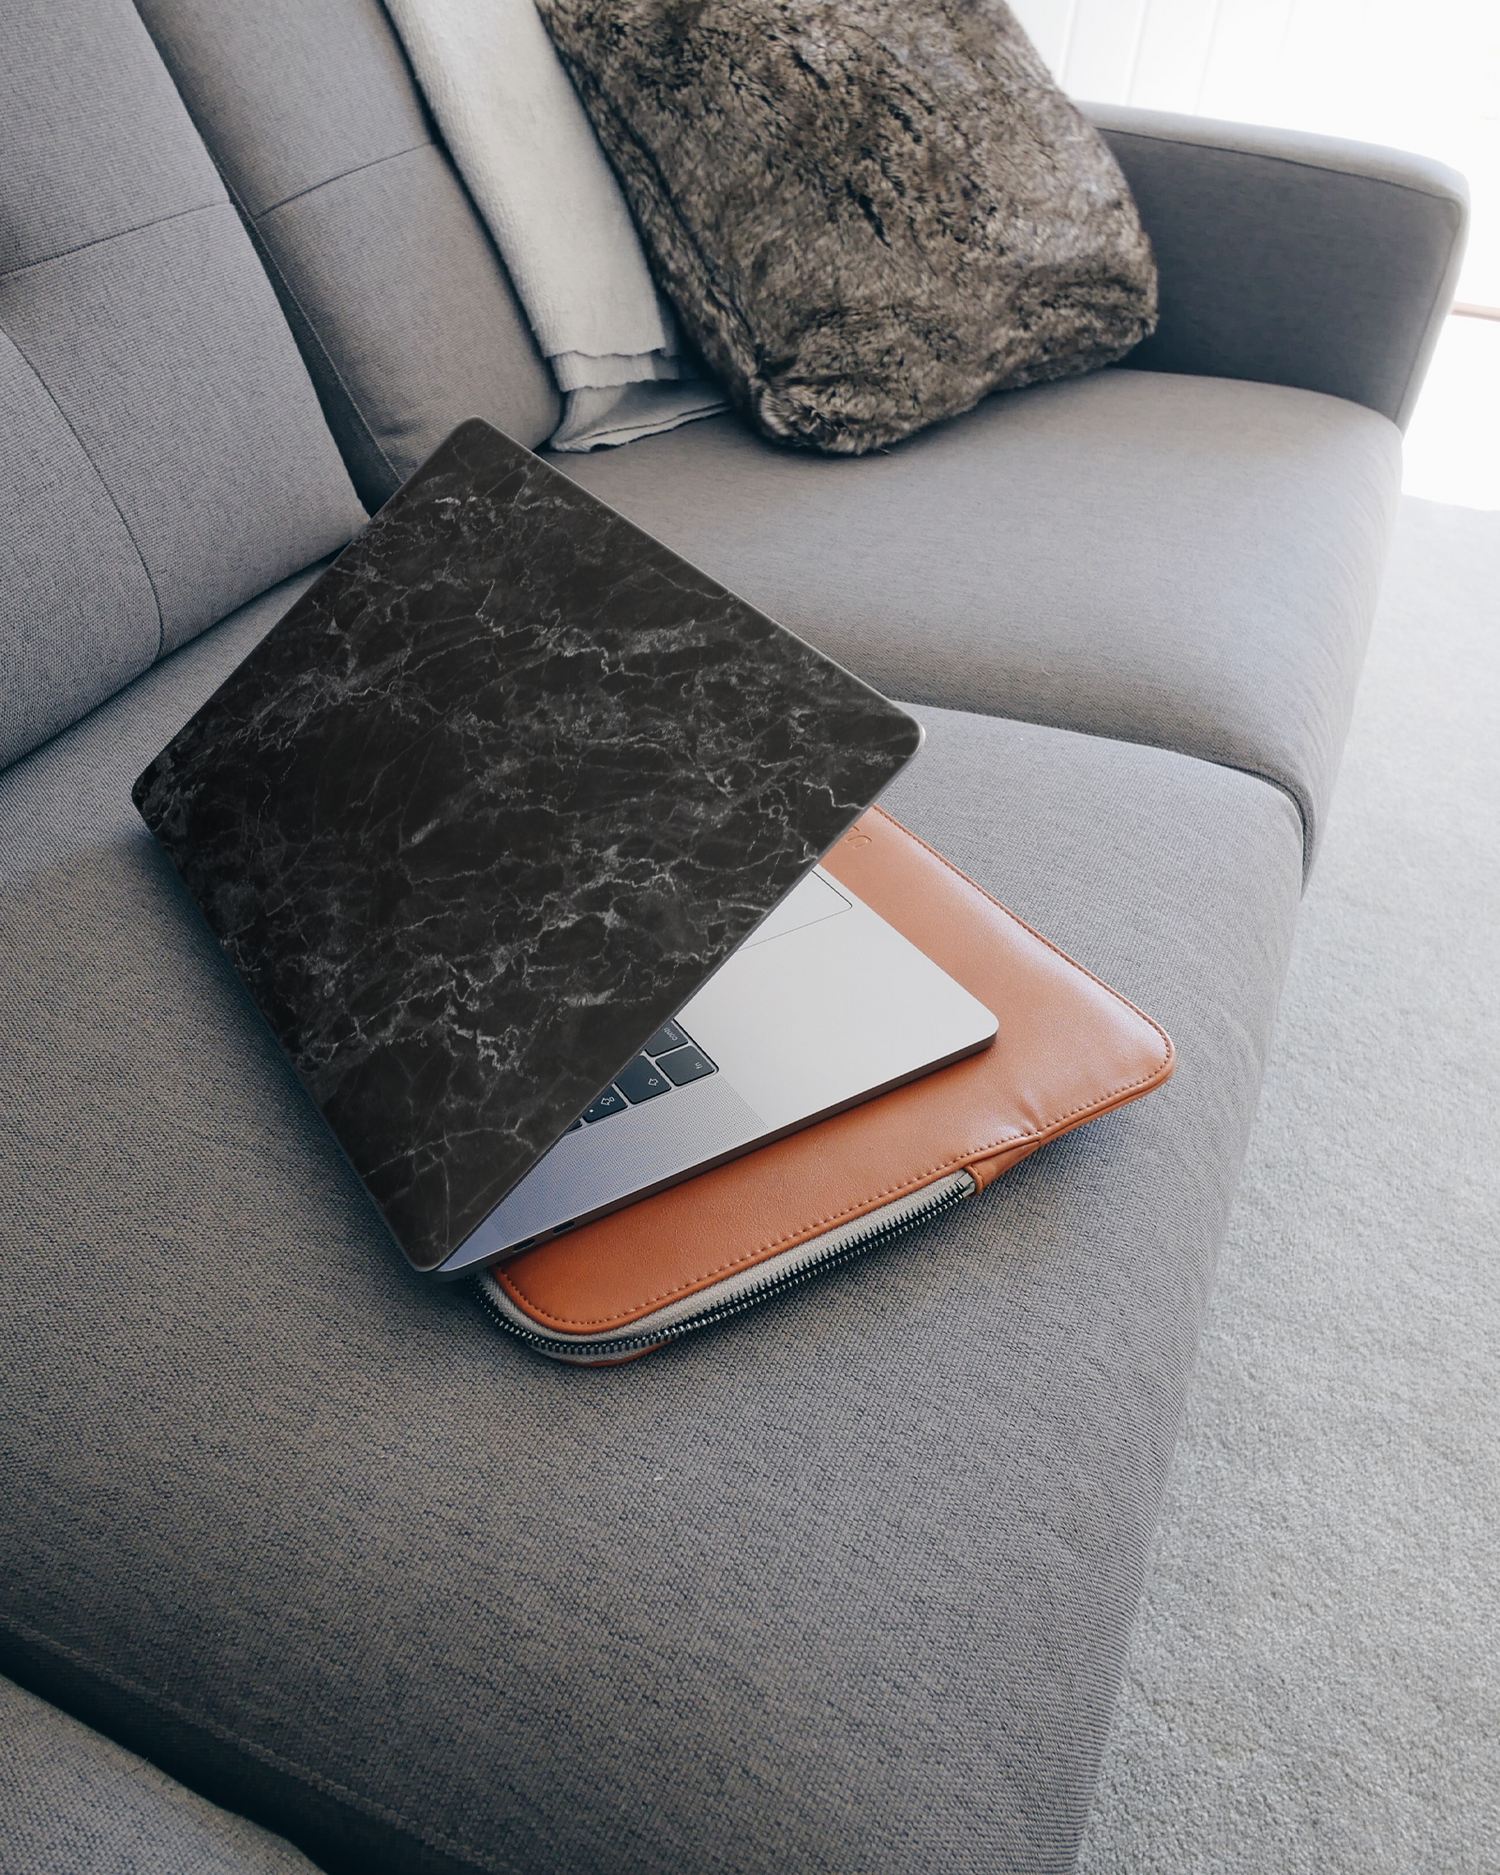 Midnight Marble Laptop Skin for 15 inch Apple MacBooks on a couch